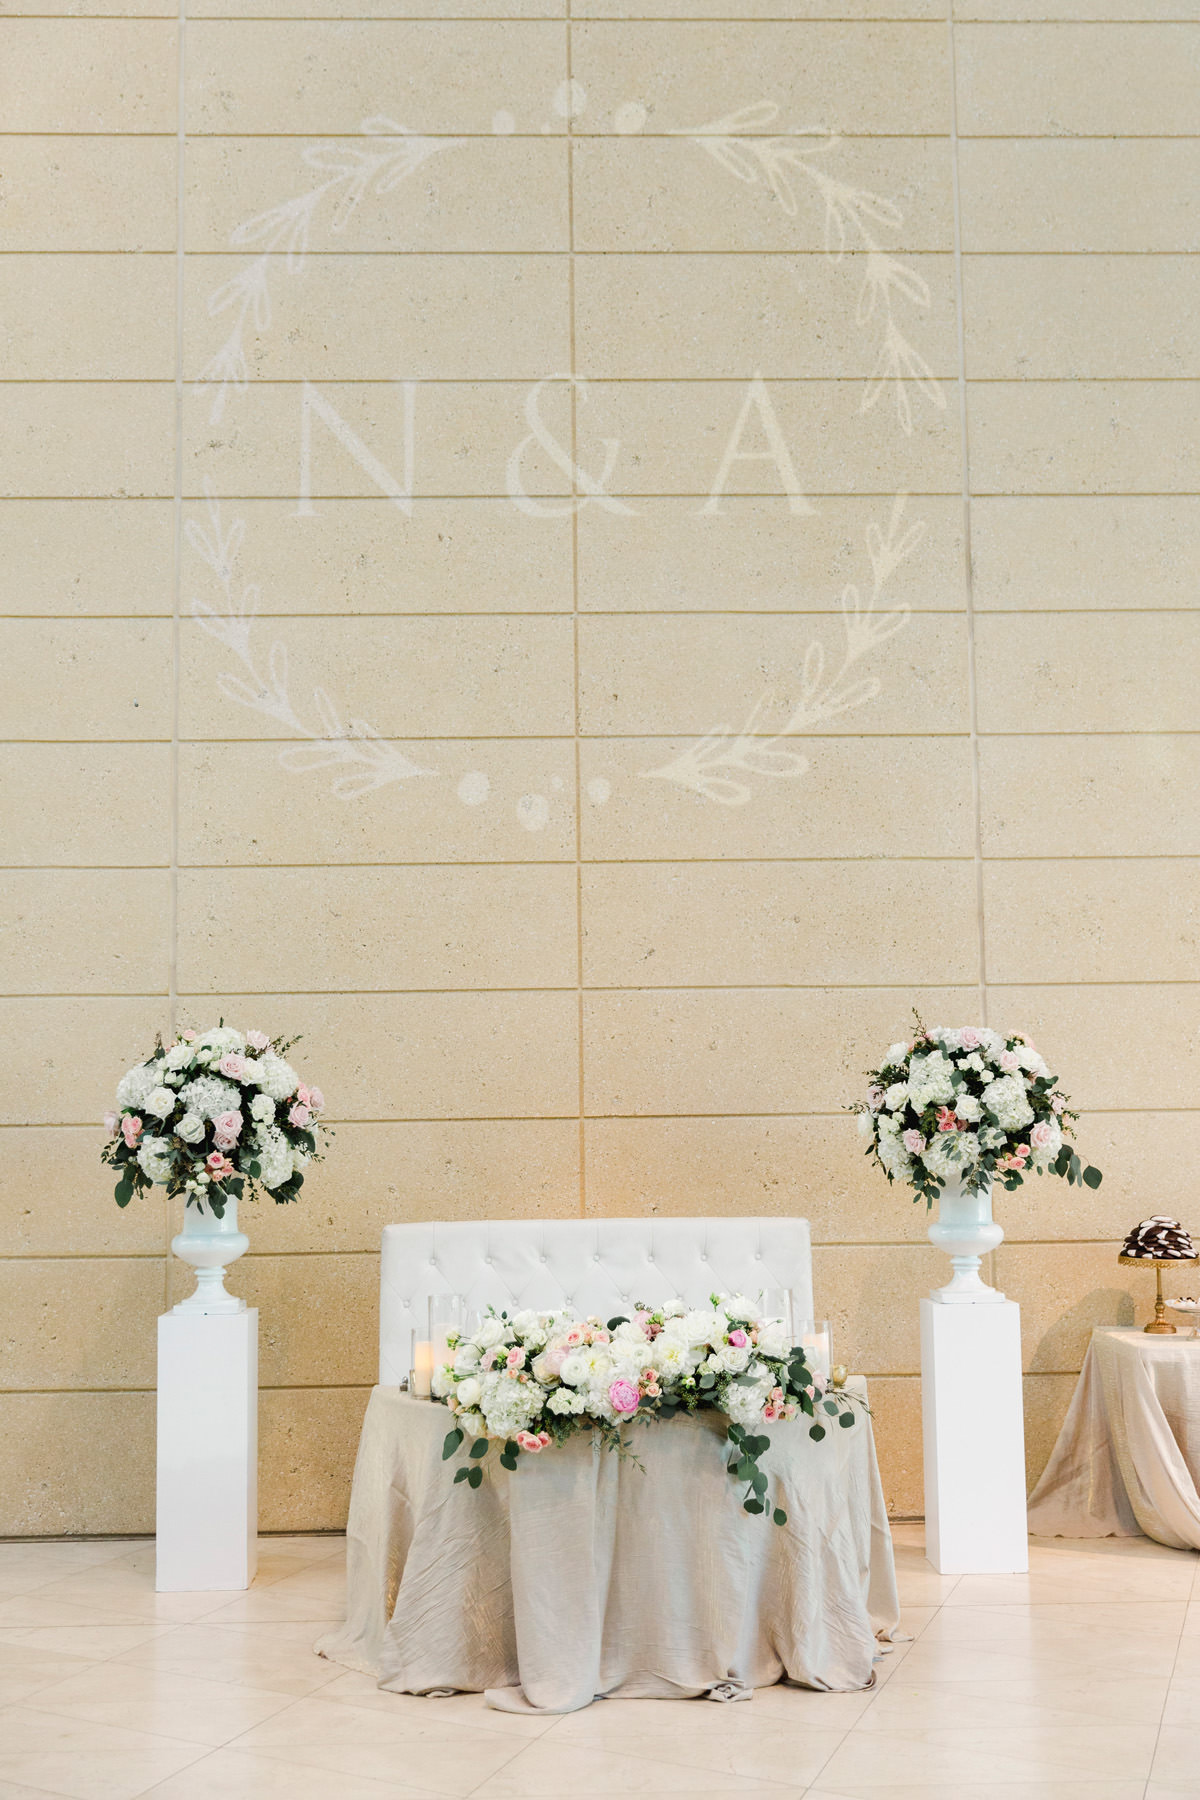 Wedding Sweetheart Table with Loveseat and Floral Centerpieces on Columns and Floral Halo Monogram Gobo | Bruce Wayne Florals | Rentals Gabro Event Services